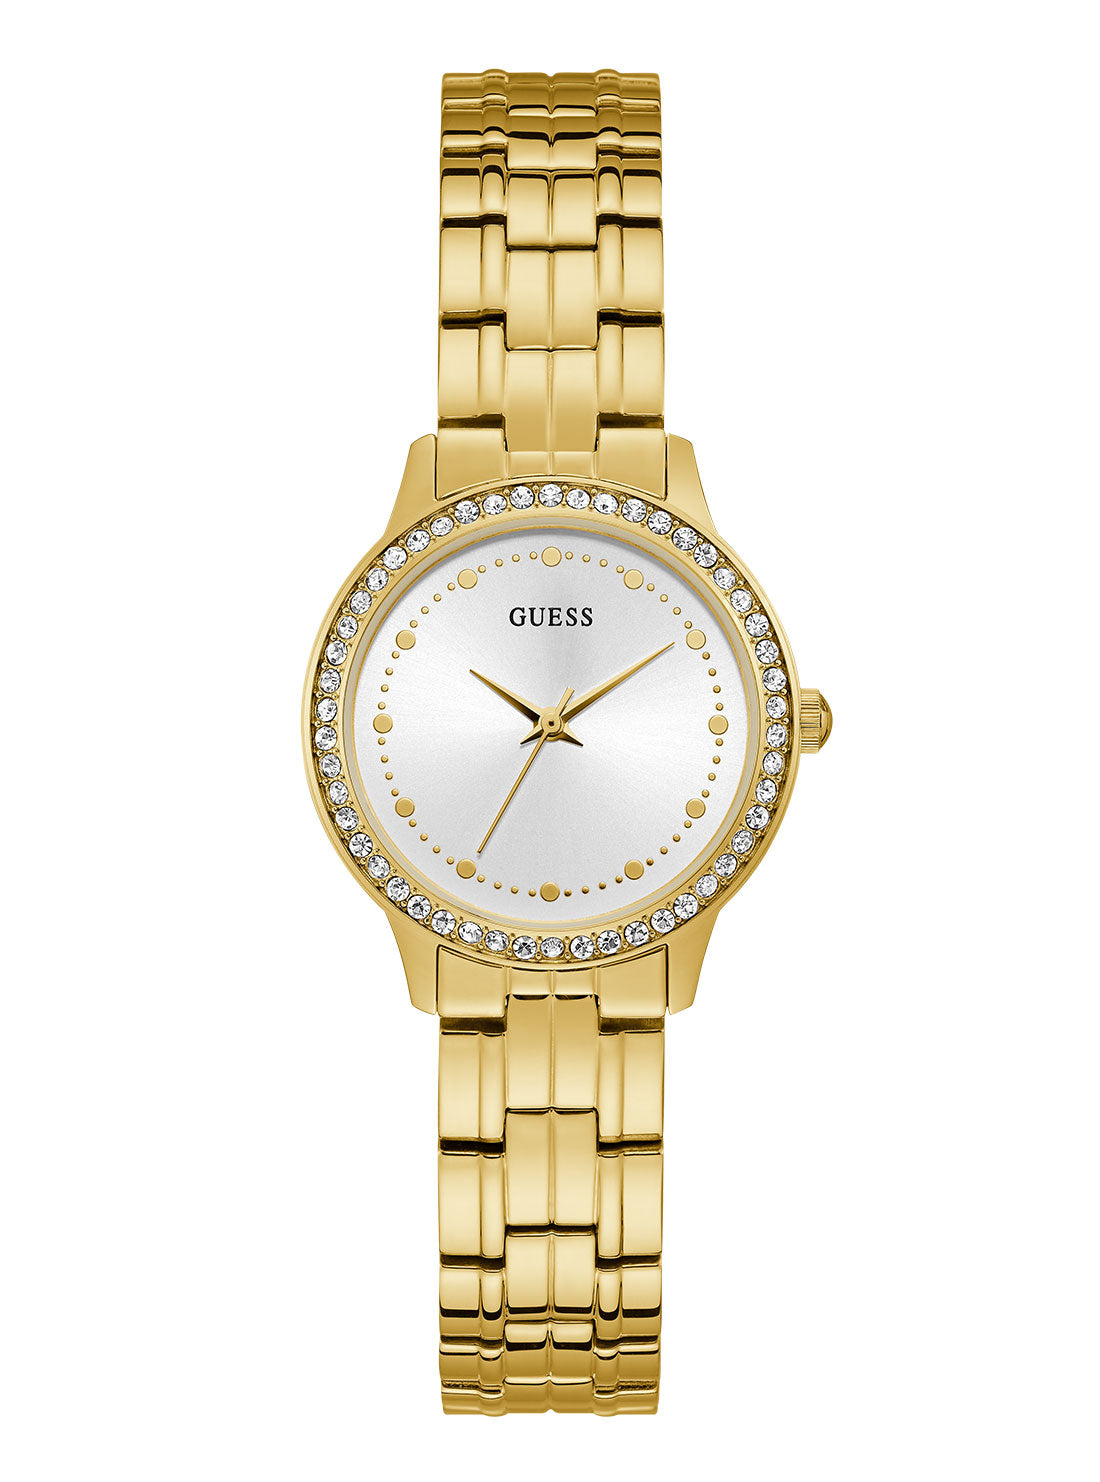 GUESS Womens Gold Chelsea Crystal Watch W1209L2 Front View